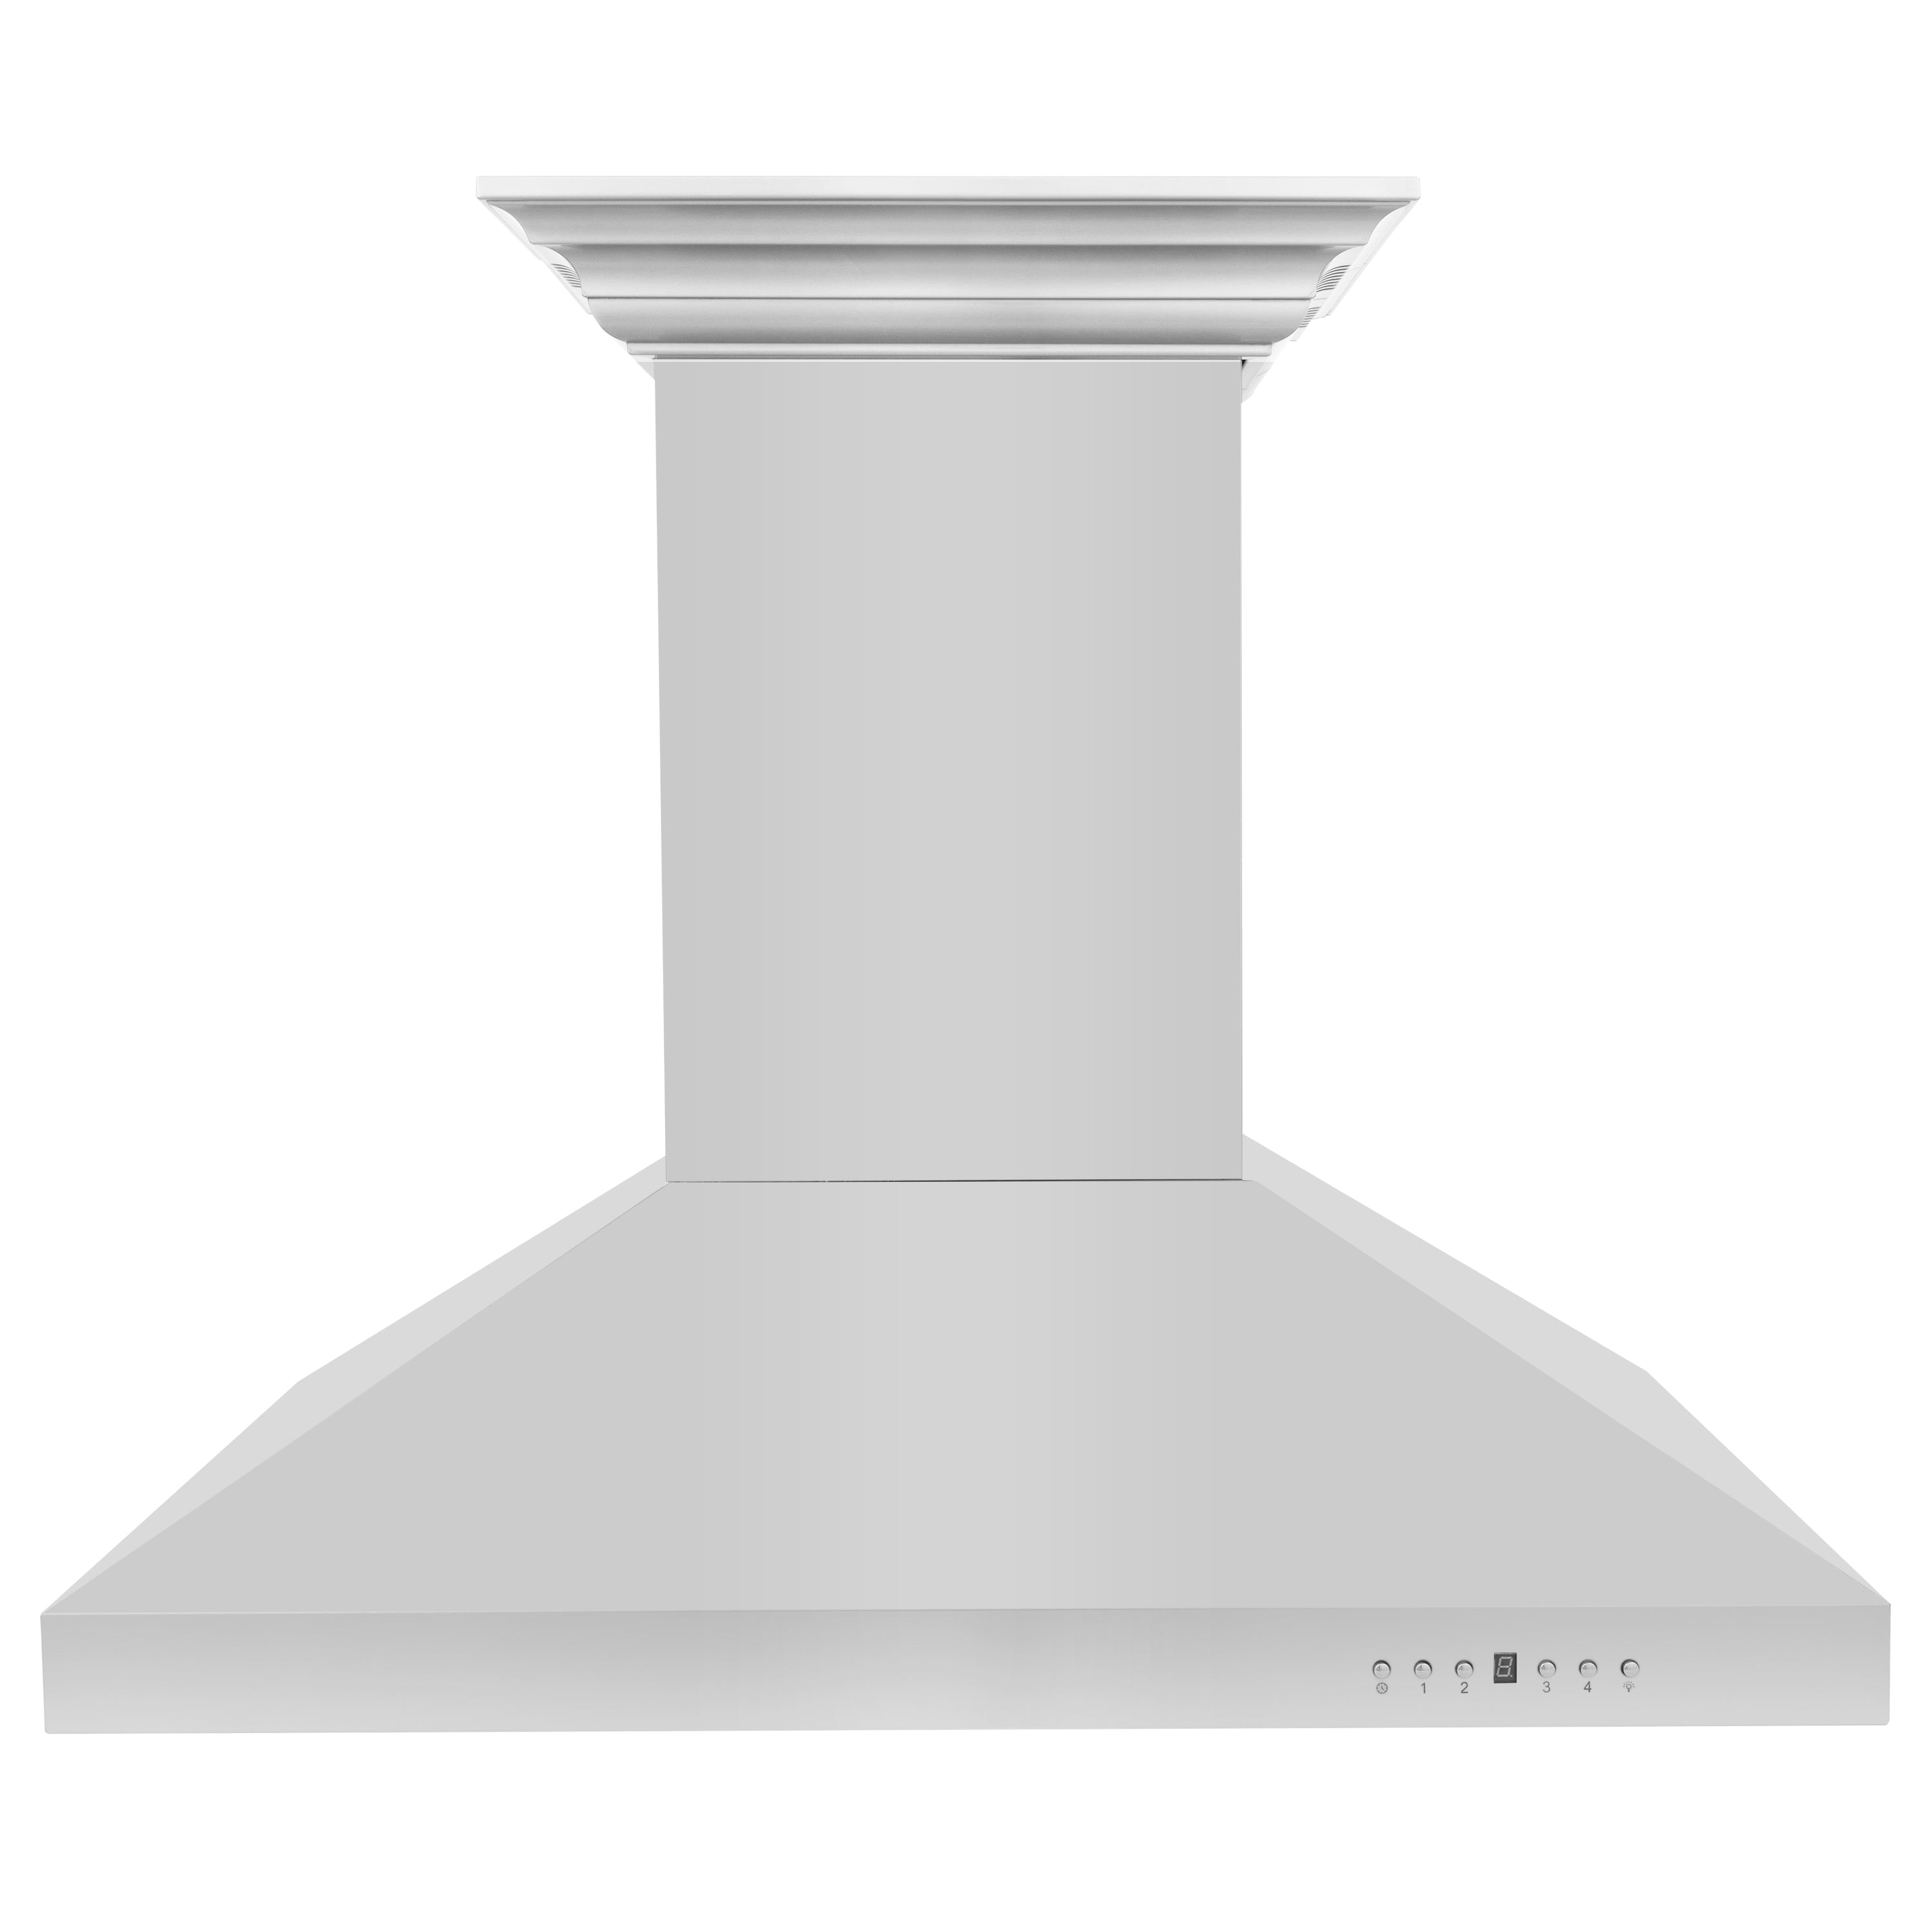 36" ZLINE CrownSound√∞ Ducted Vent Island Mount Range Hood in Stainless Steel with Built-in Bluetooth Speakers (KL3iCRN-BT-36)